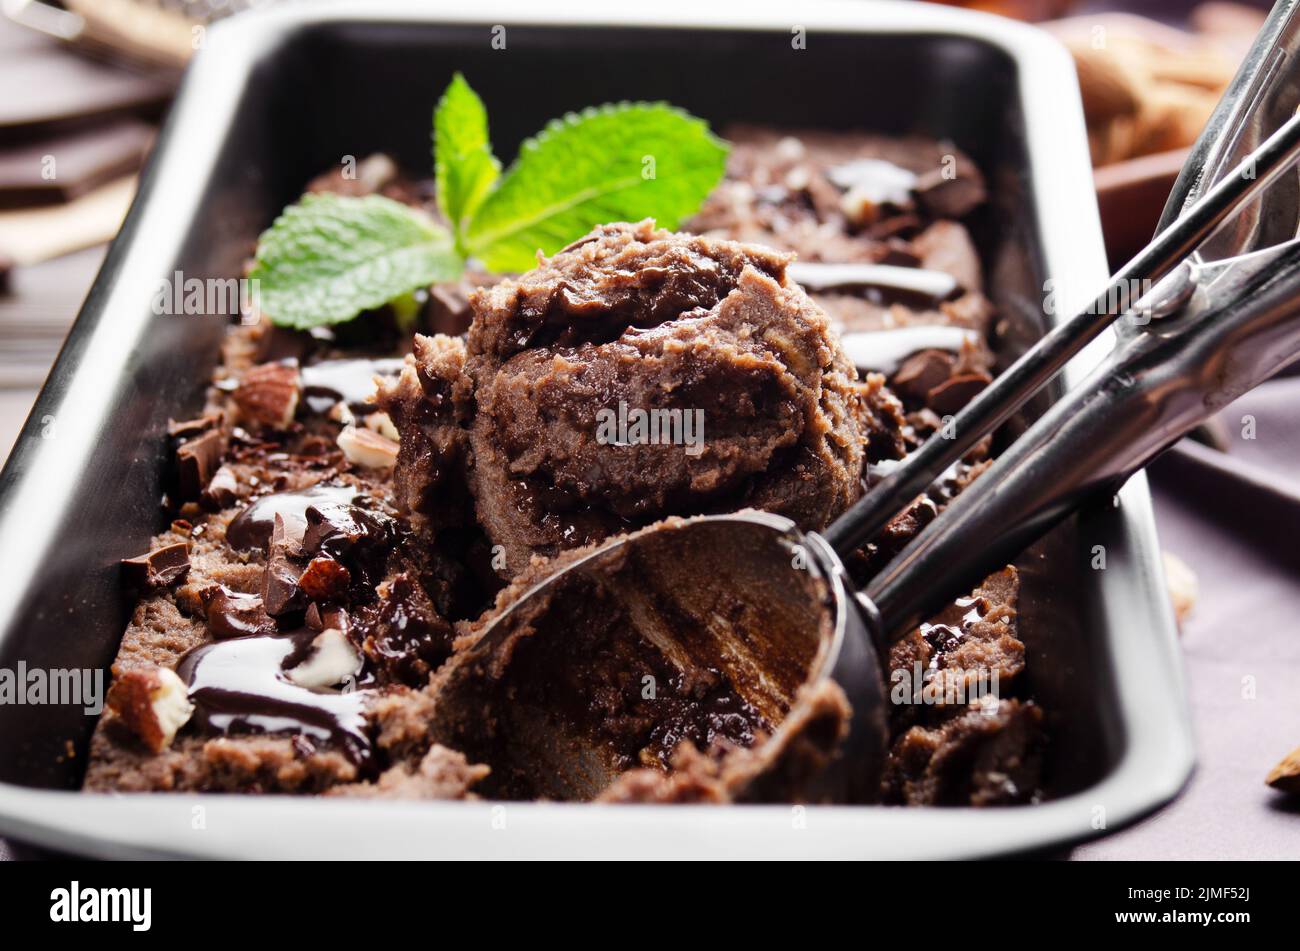 Chocolate icecream in metal tray with mint leaf and almond nuts Stock Photo